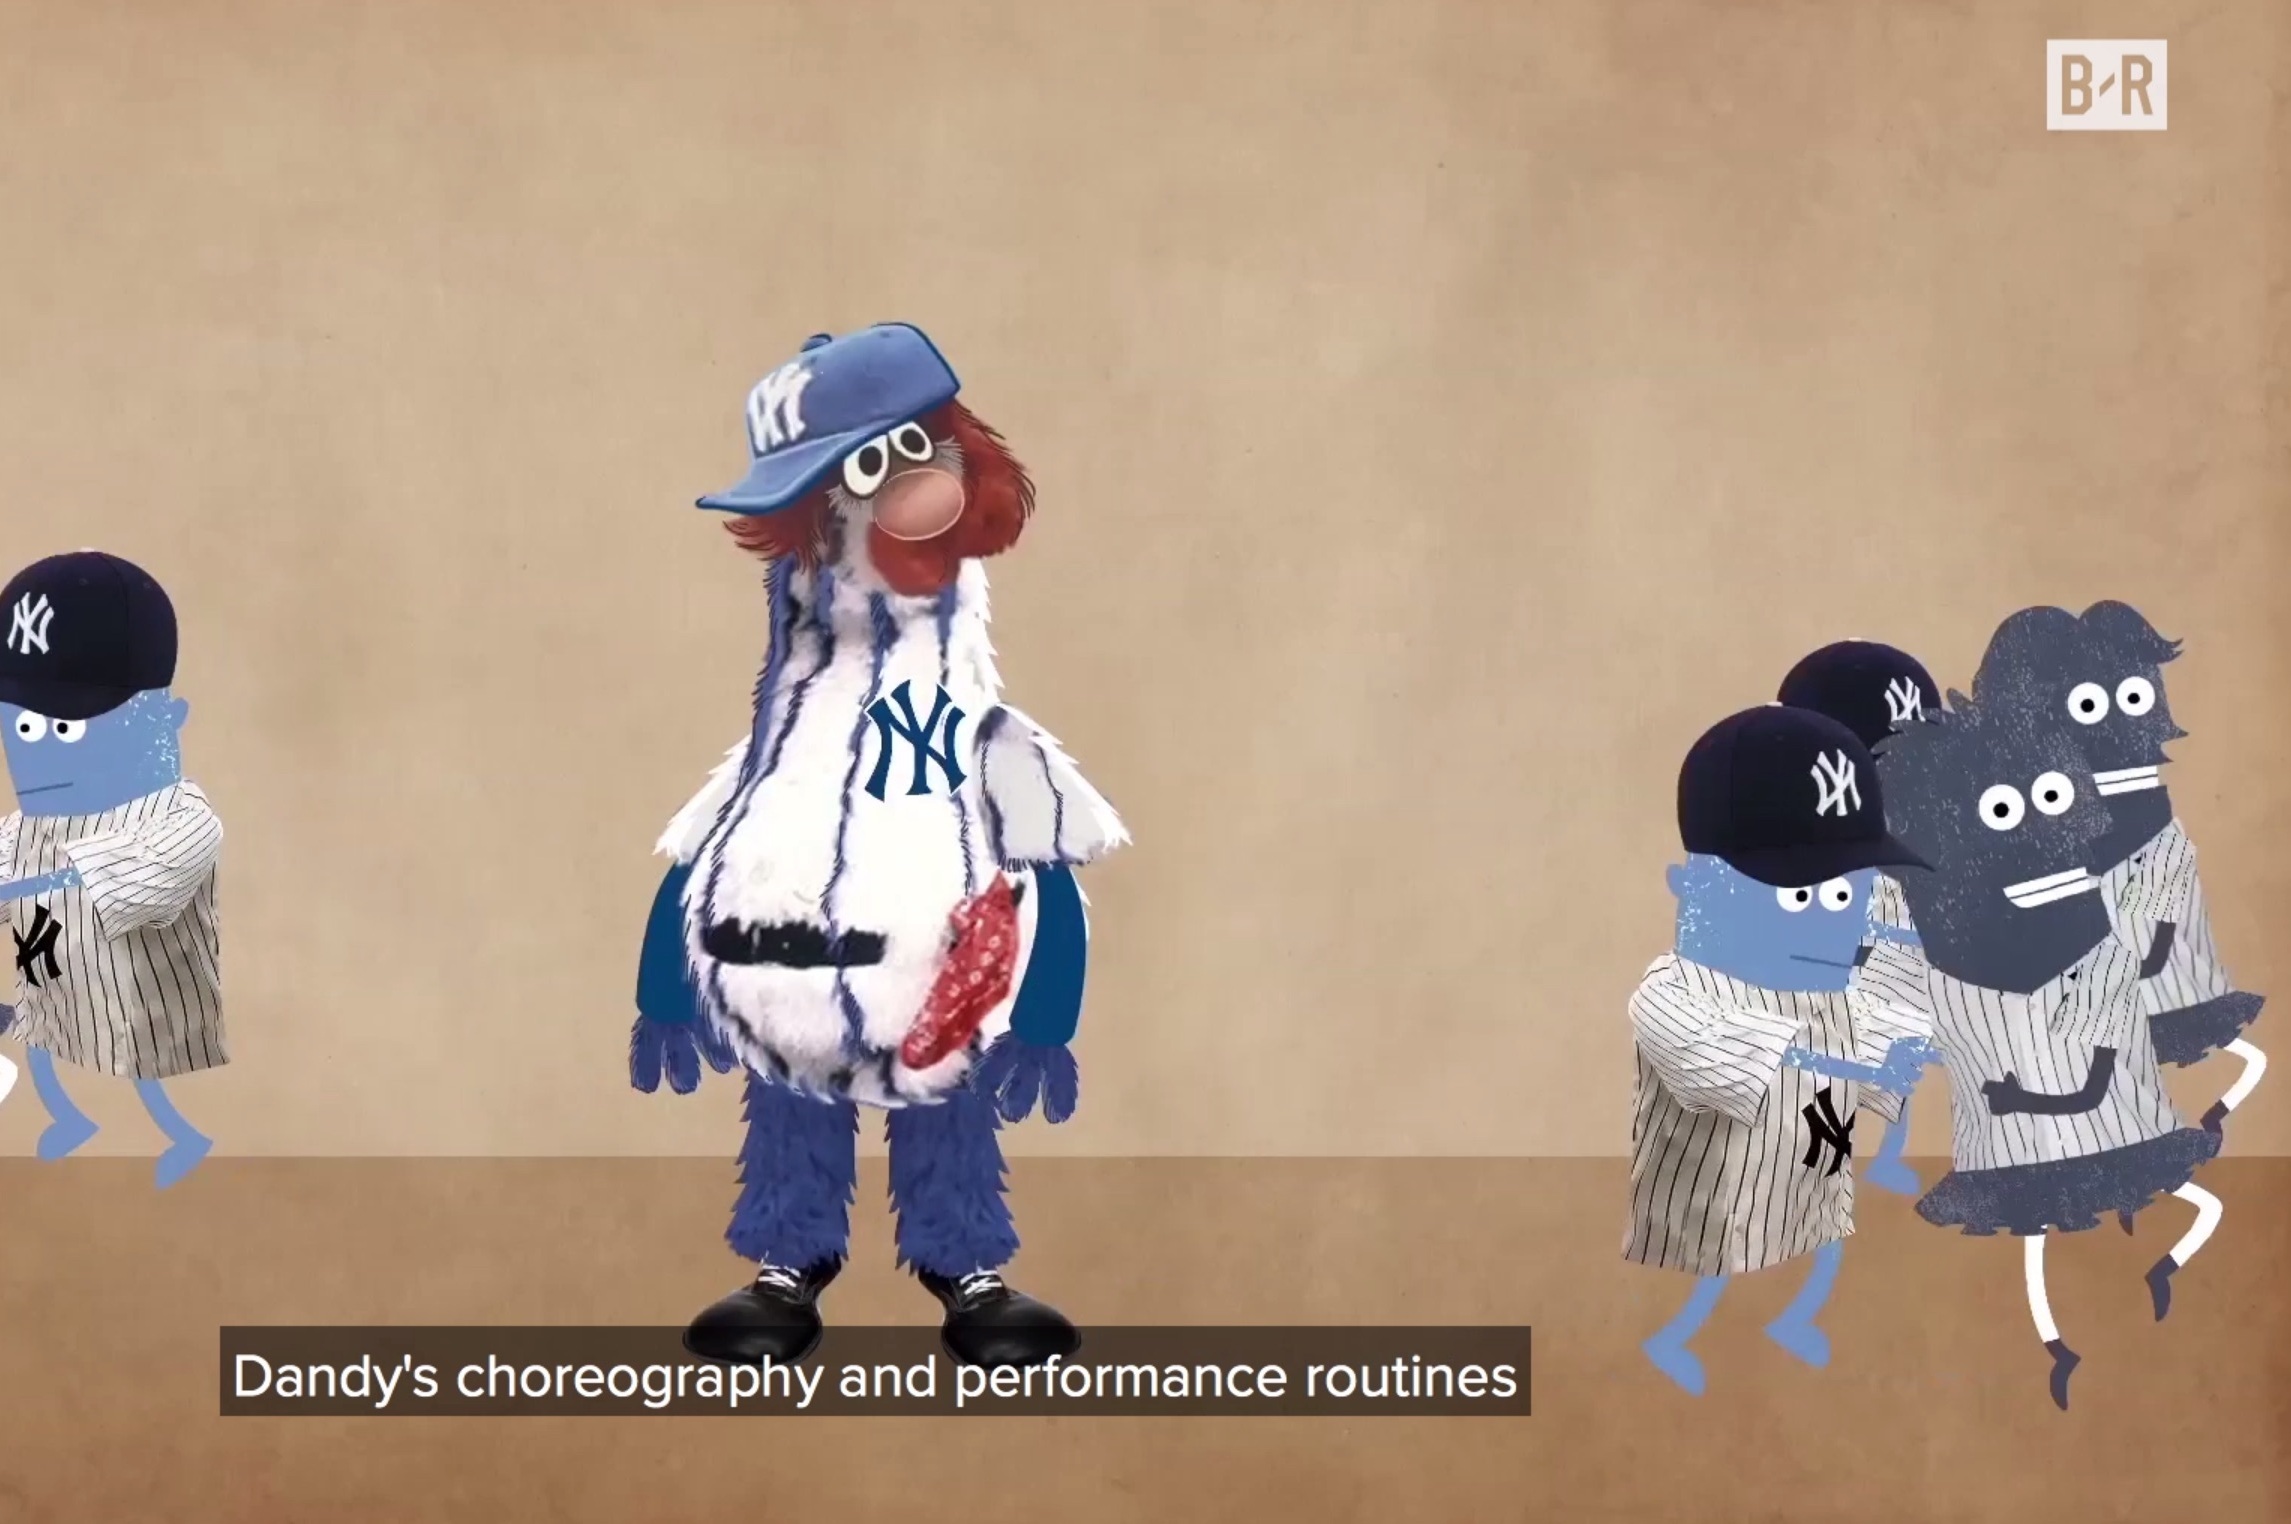 How Dandy, the Yankees' only mascot, became an embarrassment